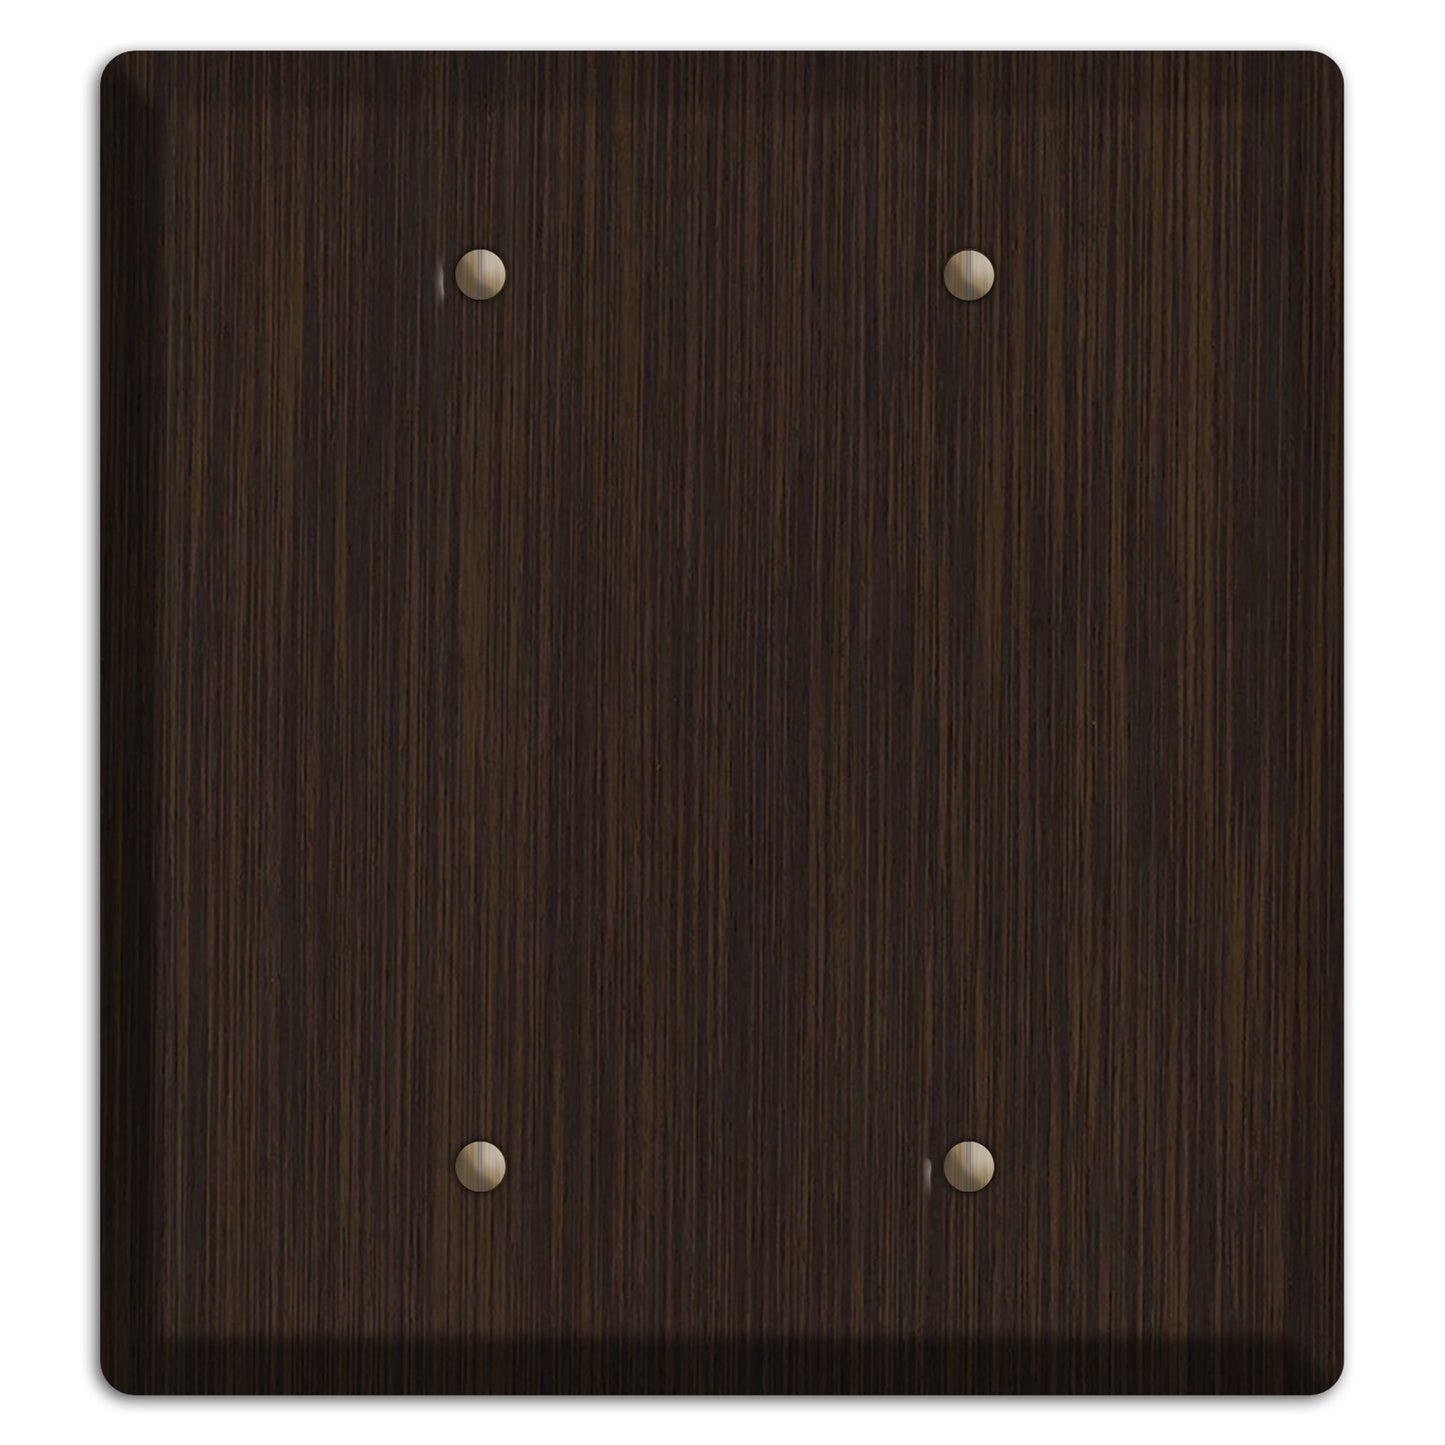 Wenge Wood Double Blank Cover Plate